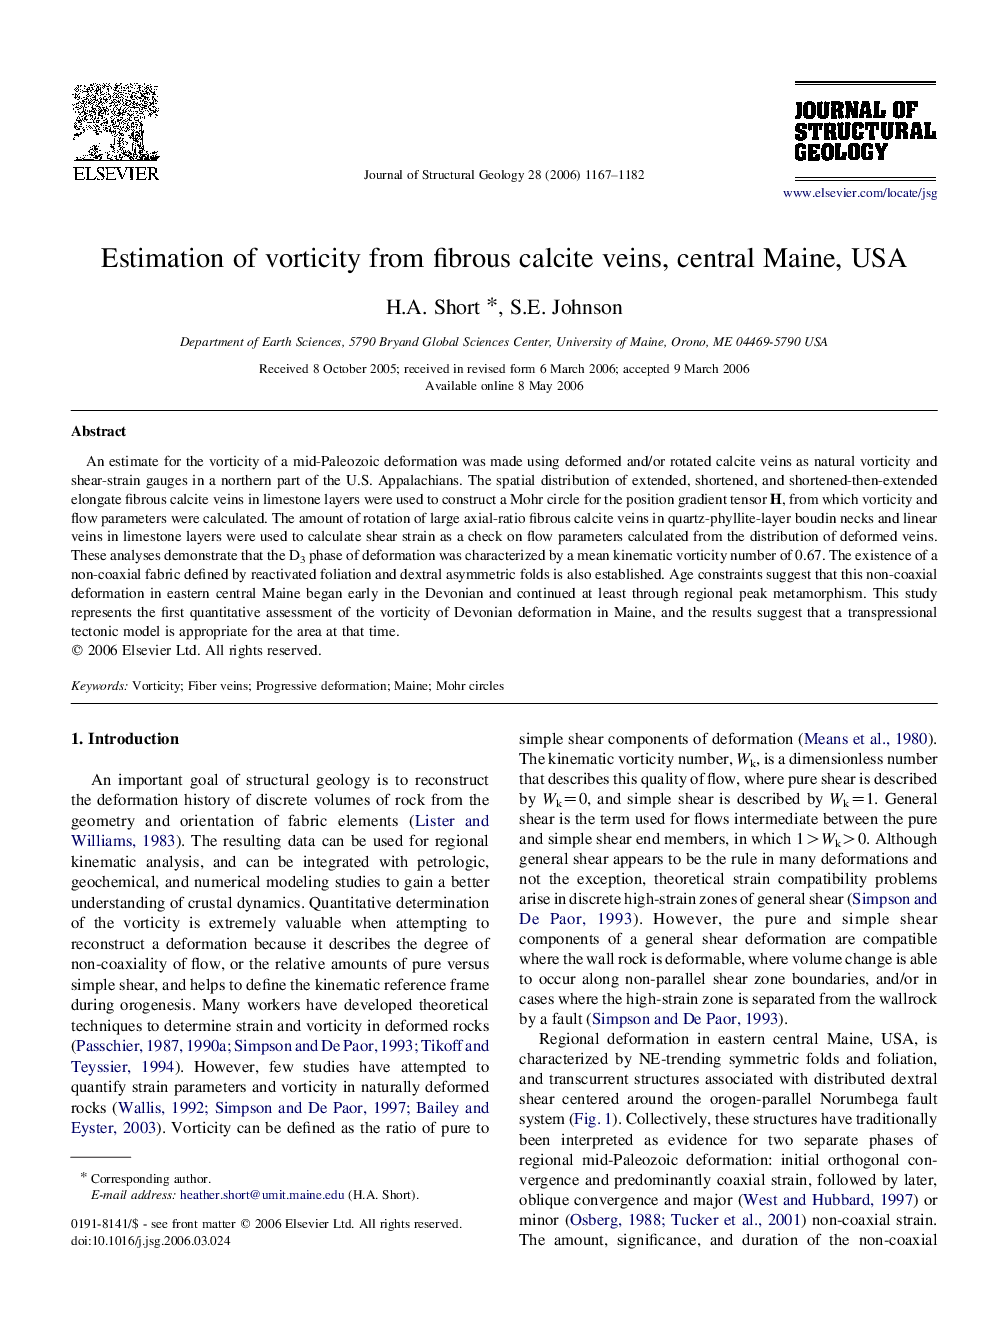 Estimation of vorticity from fibrous calcite veins, central Maine, USA